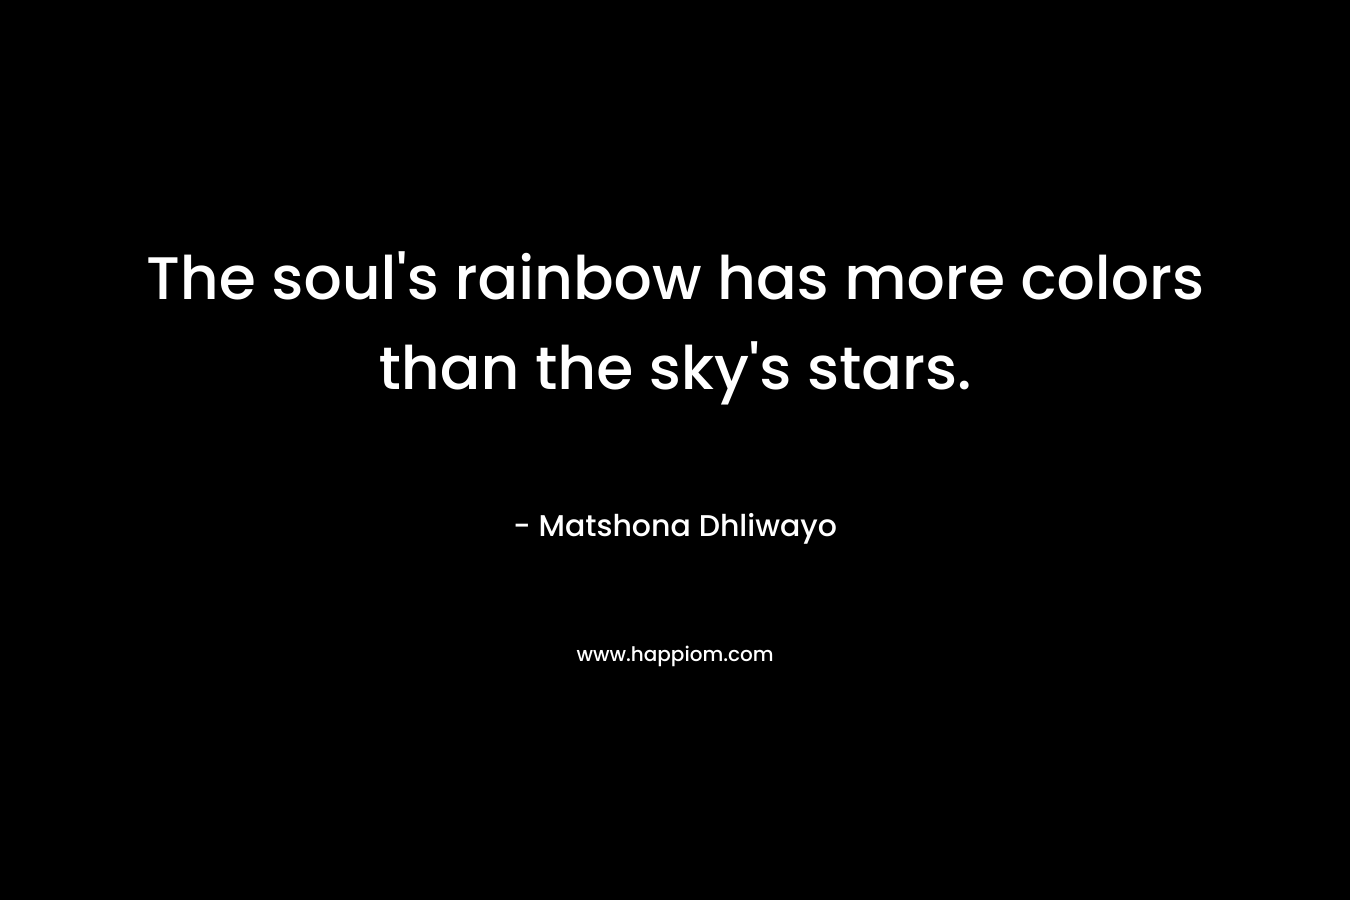 The soul’s rainbow has more colors than the sky’s stars. – Matshona Dhliwayo